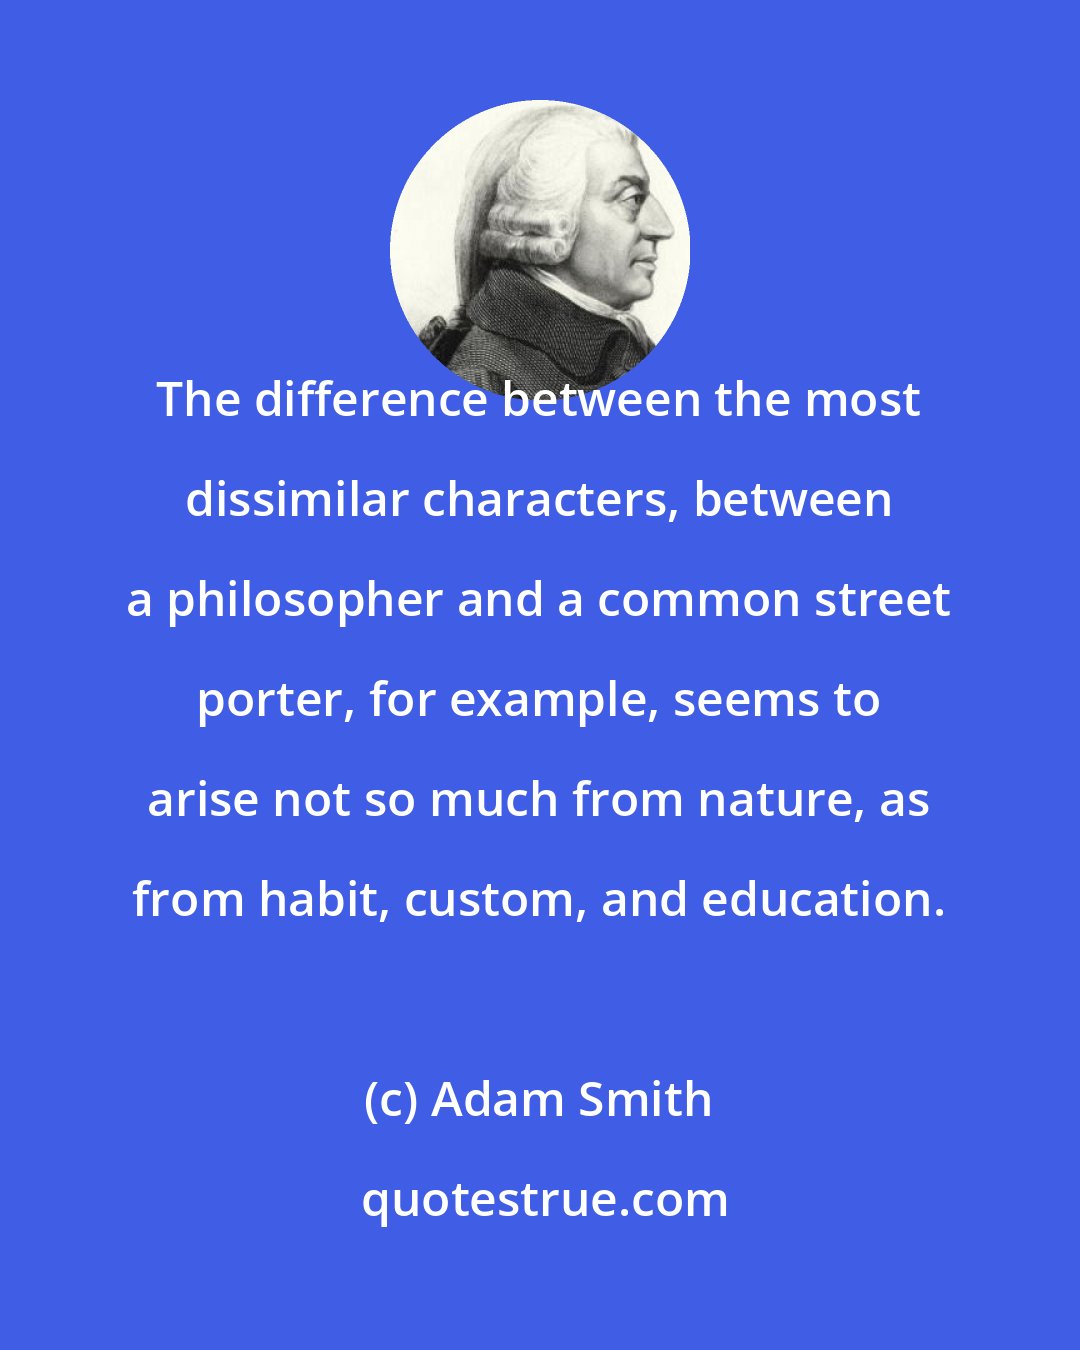 Adam Smith: The difference between the most dissimilar characters, between a philosopher and a common street porter, for example, seems to arise not so much from nature, as from habit, custom, and education.